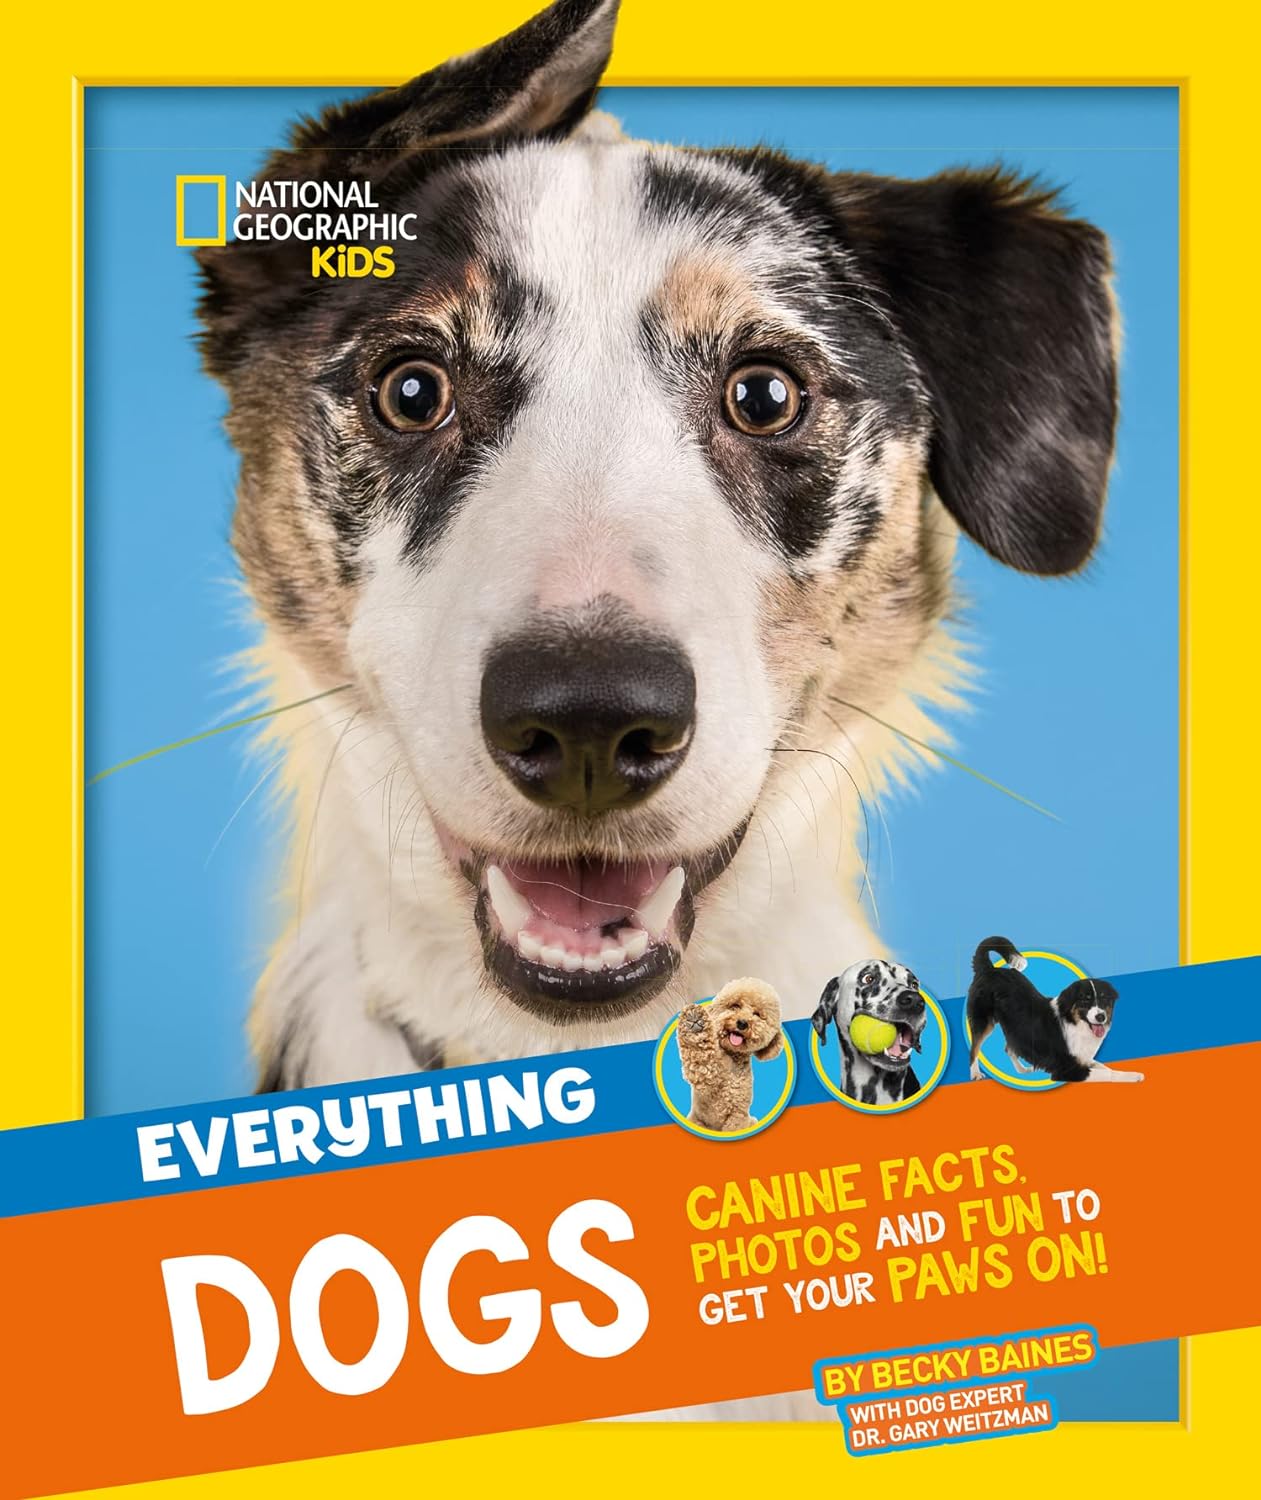 Everything: Dogs: Canine facts, photos and fun to get your paws on!